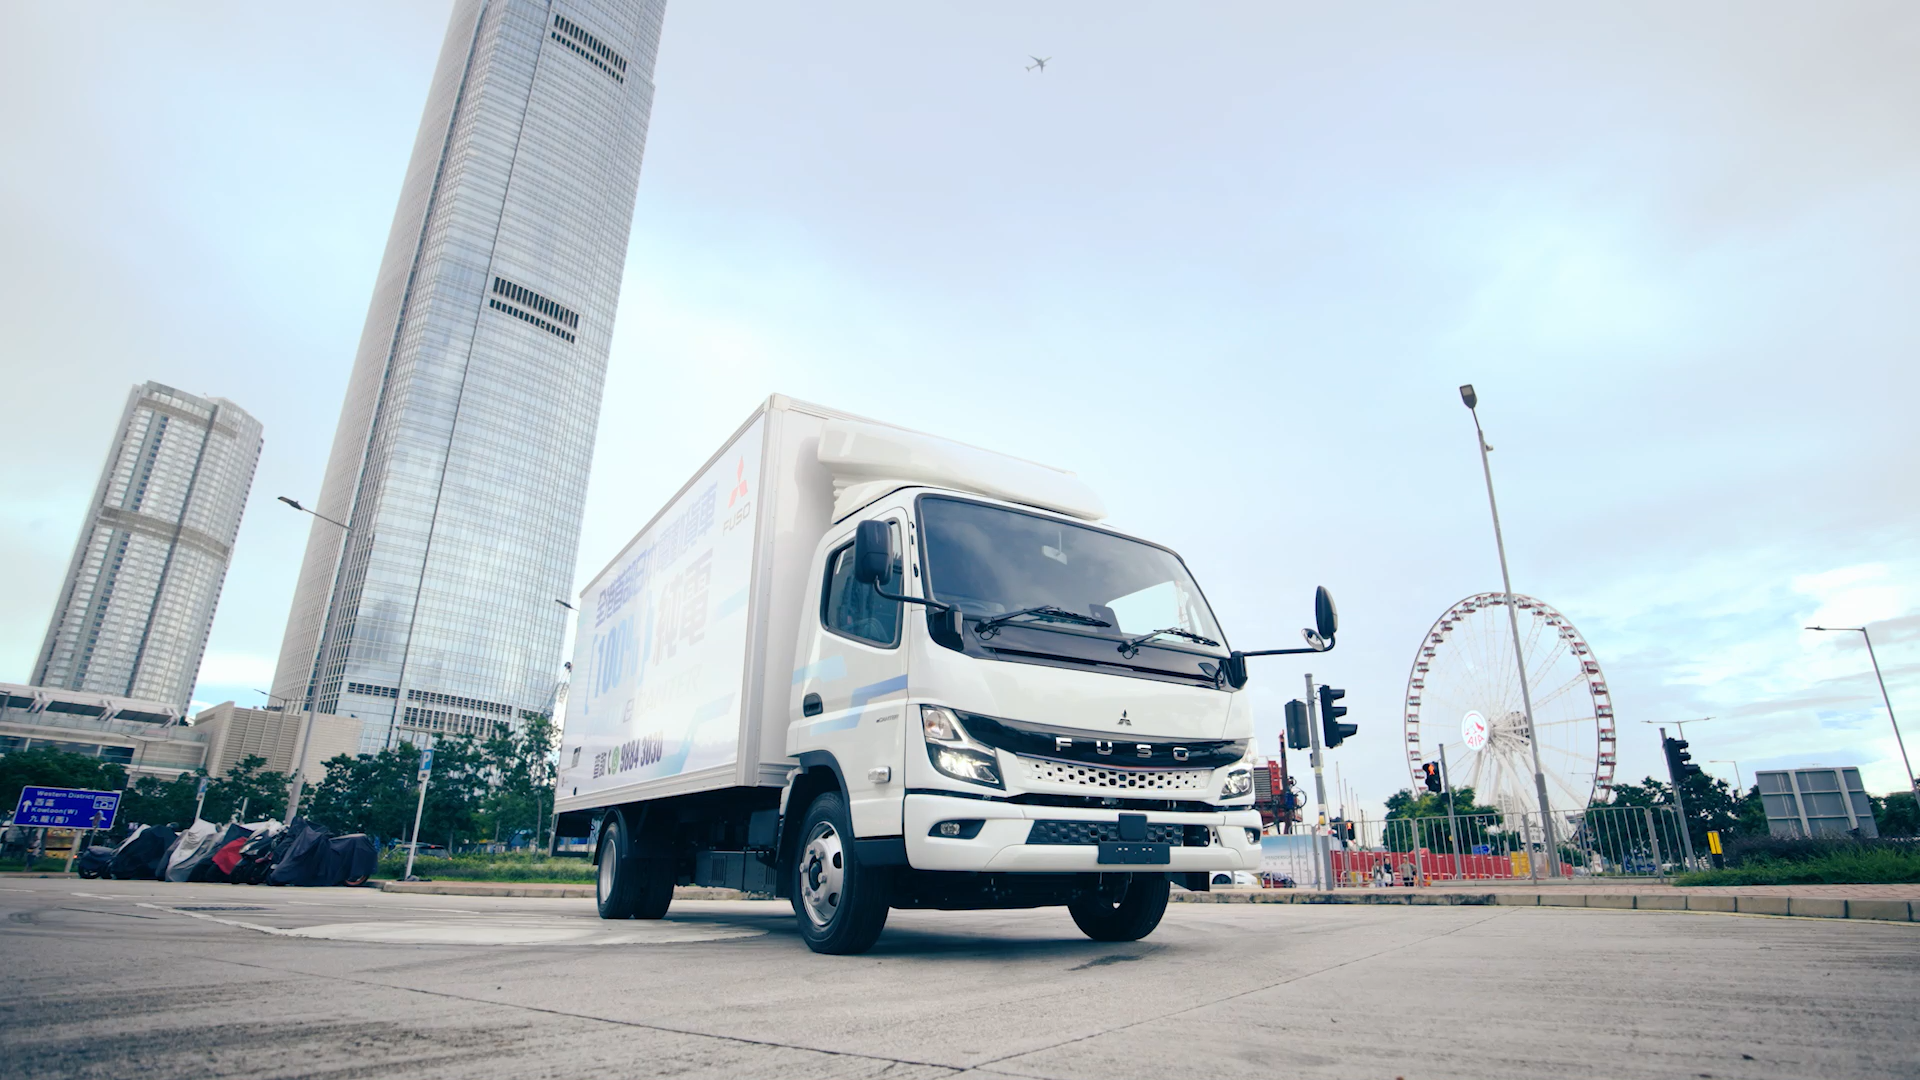  FUSO’s all-electric light-duty eCanter truck introduced in Hong Kong; first Asian market launch outside Japan